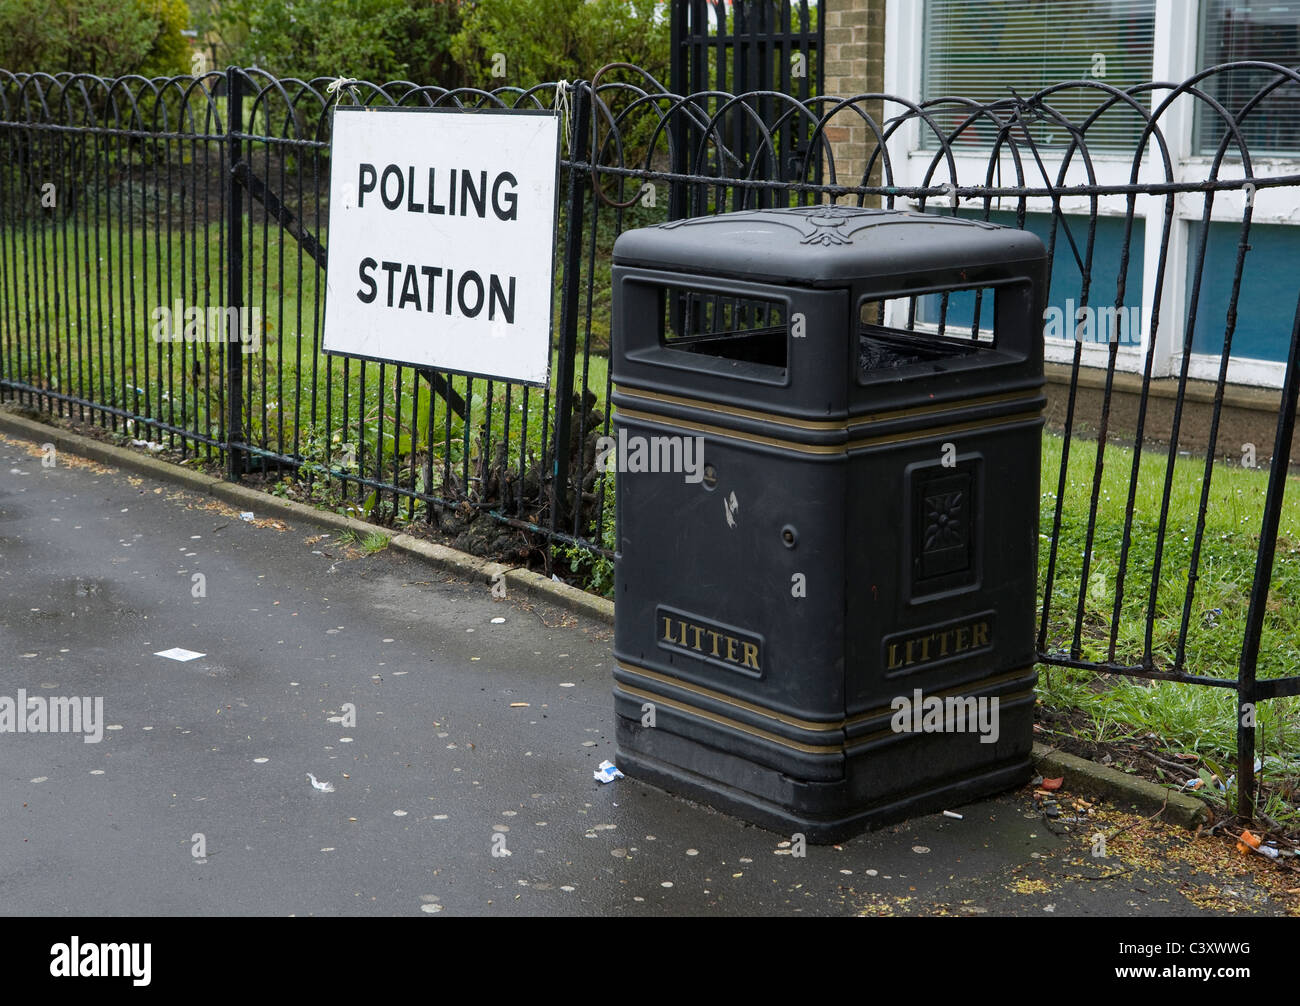 A polling station sign next to a litter bin during a local election Stock Photo